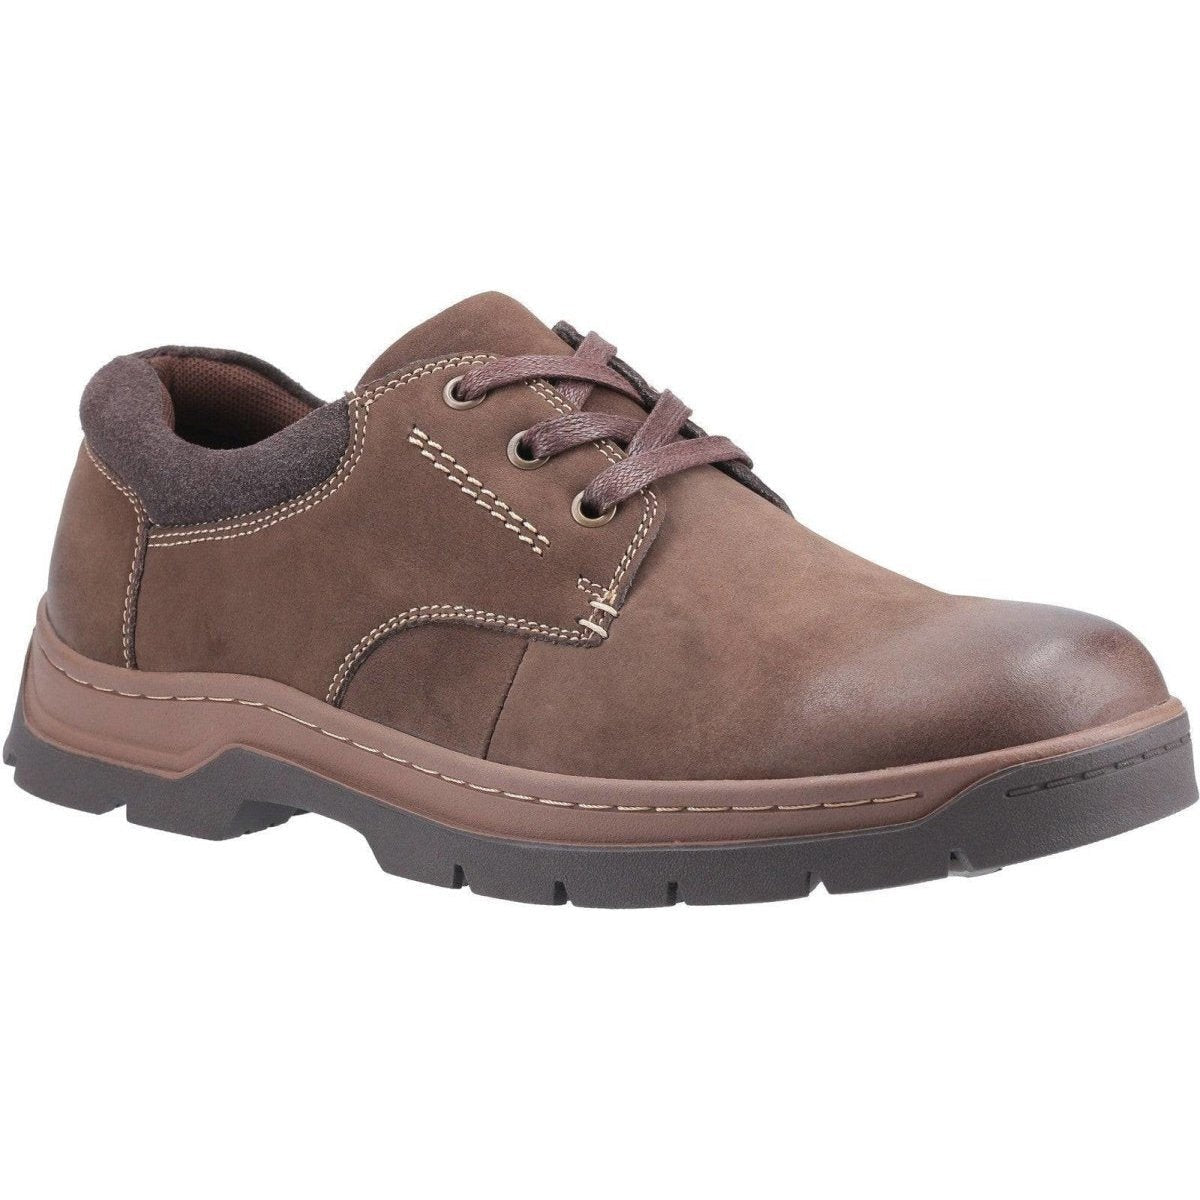 Cotswold Thickwood Burnished Leather Casual Mens Shoes - Shoe Store Direct